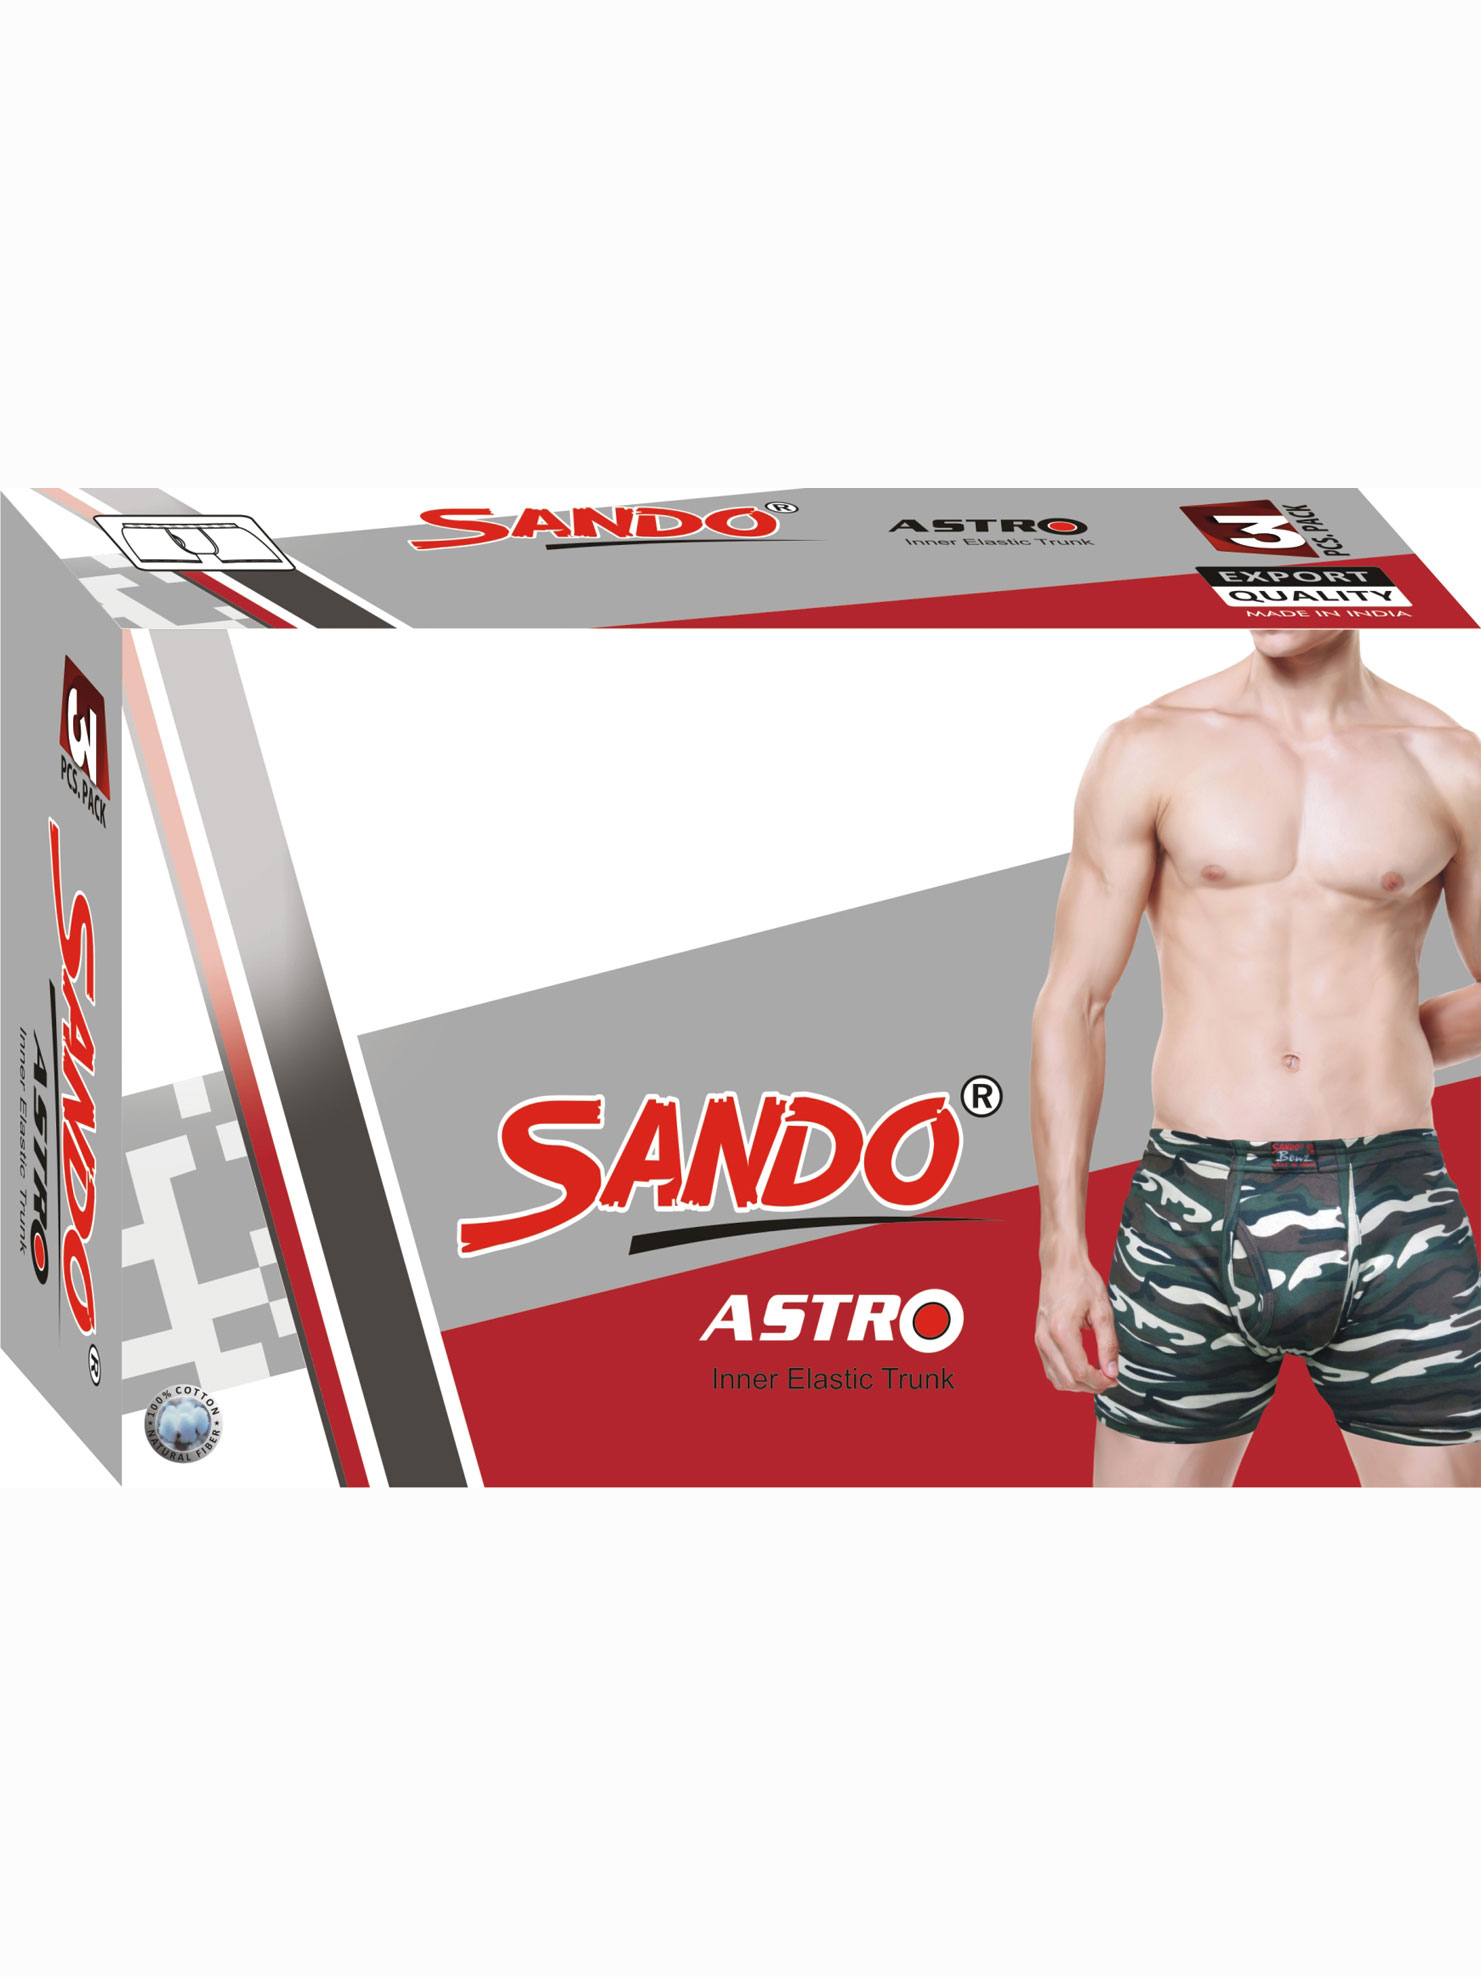 astro-long-trunk-ie-af1aad42-sando astro trunk ie 3 pcs pack.jpg0